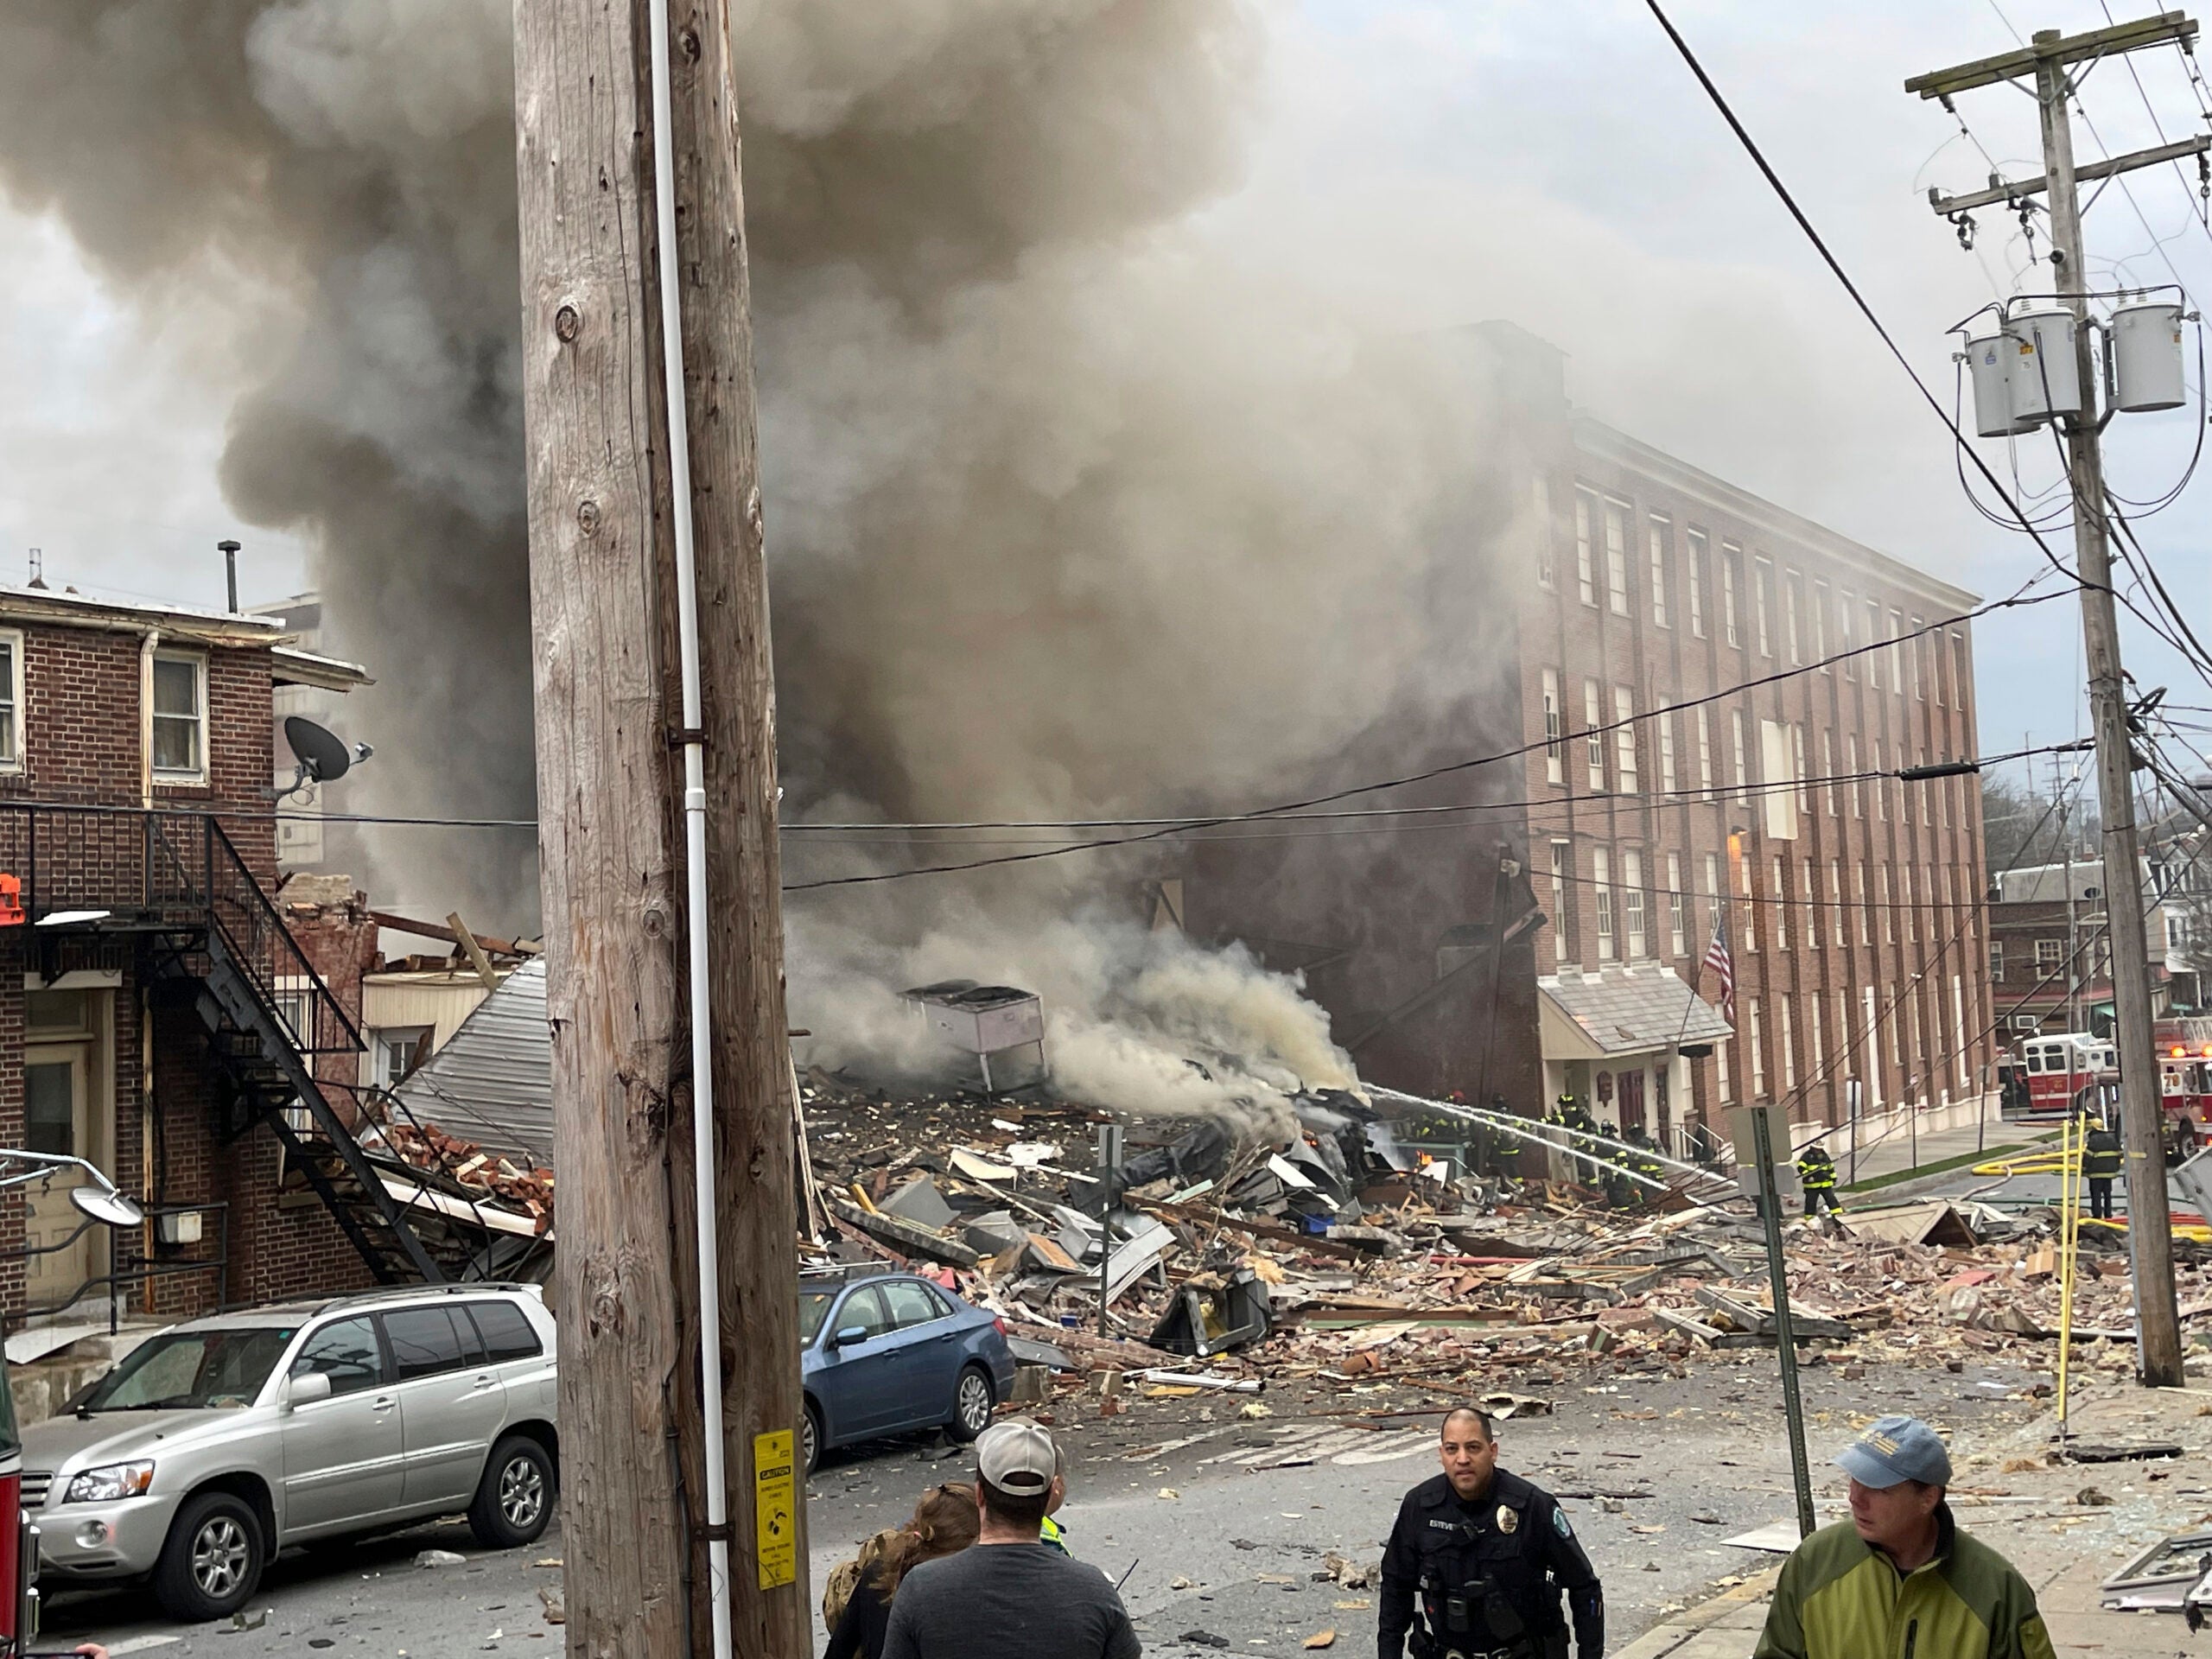 Emergency personnel work at the site of the deadly explosion in West Reading, Pennsylvania, on Friday.